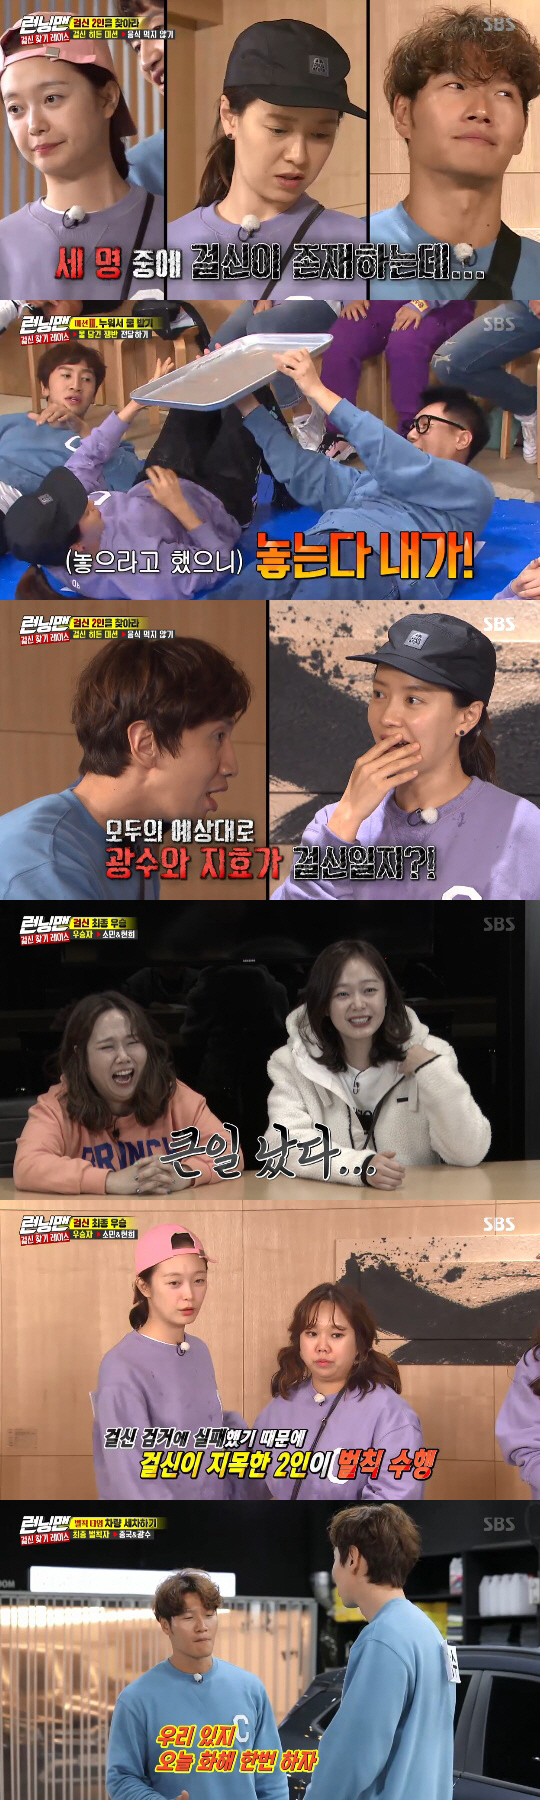 Running Man Jeon So-min and Hong Hyun-hee won the victory by succeeding in Gülsin Onay Hidden.On SBS Running Man broadcasted on the 3rd night, Gülsin Onay Find Race was held.Yoo Jae-Suk, Song Ji-hyo, Jeon So-min and Yang Se-chan received penalties from the opening.In the last broadcast, the winners of the opening makeup penalties were transformed into Lamar Jackson, Angry Bird, Minions, and octopus witch Usla, respectively.Since then, the penalties have received a simple pre-mission from the production team before the full-scale mission.Four other members who have not received a penalty, guest Hong Hyun-hee and Park Ji-hyun, should escape for 30 minutes and keep the name tag with the chance.First Haha captured Song Ji-hyo, dressed as Angry Bird.Having the opportunity to rip off two name tags, Haha won the chance as soon as he first opened it and made Song Ji-hyo in-N-Out Burger.Haha then won the chance of Jeon So-min, who turned into a minion.Hong Hyun-hee also got a chance to in-N-Out Burger Yang Se-chan, who dressed as an octopus witch Usla.Yoo Jae-Suk, who turned into Lamar Jackson, avoided the members well, but unfortunately was caught by Lee Kwang-soo just before the end.However, Lee Kwang-soo did not open the name tag of the name tag of Yoo Jae-Suk, and the chance ticket became the charge of Yoo Jae-Suk.On the other hand, the mission of the day is a restaurant tour race with guests.Only the winning members can eat, with the number of people to eat and the commission different from each restaurant, and the members who won the chance before could use only one bite at the restaurant they wanted when they did not get a chance to eat.However, two Gülsin Onay existed among the members, and Hidden Mission of Gülsin Onay was not to eat.The members should taste the three delicacies and then vote for Gülsin Onay to find Gülsin Onay, which did not eat food.If they could not find out, Gülsin Onay won, and the two identified by Gülsin Onay had to remain after work and carry out a hand-washing penalty.Members who received the mission doubted Lee Kwang-soo, who had been in a poor state of mission performance.The members who moved to the mission place then went on to game with the first set of delicacies, the Tongdol octopus meeting set; the first game was the snowball game, which set the number of meals.Members suspected Lee Kwang-soo, who was caught in the game, and Yoo Jae-Suk, who interfered with the game.In the game, which puts the teeth into the lips without seeing them, Park Ji-hyun transformed into a Dutch grandmother and played a big role.As a result, three people ate food from the first game to Park Ji-hyun, Yang Se-chan and Haha using the chance.The crew reported that there was no Gülsin Onay among the three, and the remaining members were more suspicious.Game, which was played with a second delicacy crab pasta, was a game to hit the figure. Kim Jong-kook won the first round, and Hong Hyun-hee won the second round.The winning team Yoo Jae-Suk, Ji Suk-jin, Lee Kwang-soo, Hong Hyun-hee and Haha, who used the chance, were eaten, and Gülsin Onay was confirmed as one of them.This did not make it possible to eat, but it was revealed that one of Kim Jong-kook, Song Ji-hyo, and Jeon So-min was Gülsin Onay.After the third delicacy, the members continued to receive the last mission.Ji Suk-jin and Song Ji-hyo, who had many toxic mistakes, were suspected of being Gülsin Onay in the Ji Suk-jin team, and Yoo Jae-Suk and Jeon So-min, who made mistakes in the Yoo Jae-Suk team, were suspected of being Gülsin Onay.Ahead of the final Gülsin Onay arrest, the members suspected Song Ji-hyo, who had a late, unexpected hole performance with Lee Kwang-soo, who had been suspected from start to finish, as Gülsin Onay, and the two won seven votes as a result.However, the two were not Gülsin Onay, and Jeon So-min and Hong Hyun-hee, who received two votes from Song Ji-hyo and Park Ji-hyun, were identified as Gülsin Onay.Jeon So-min made frequent mistakes in the mission and did not deliberately win the meal ticket, and Hong Hyun-hee won the chance from the beginning to avoid the members death. The two men who succeeded in the commission chose the penalties Zhong You Kim Jong-kook and Lee Kwang-soo, and the two were hand-washed side by side.